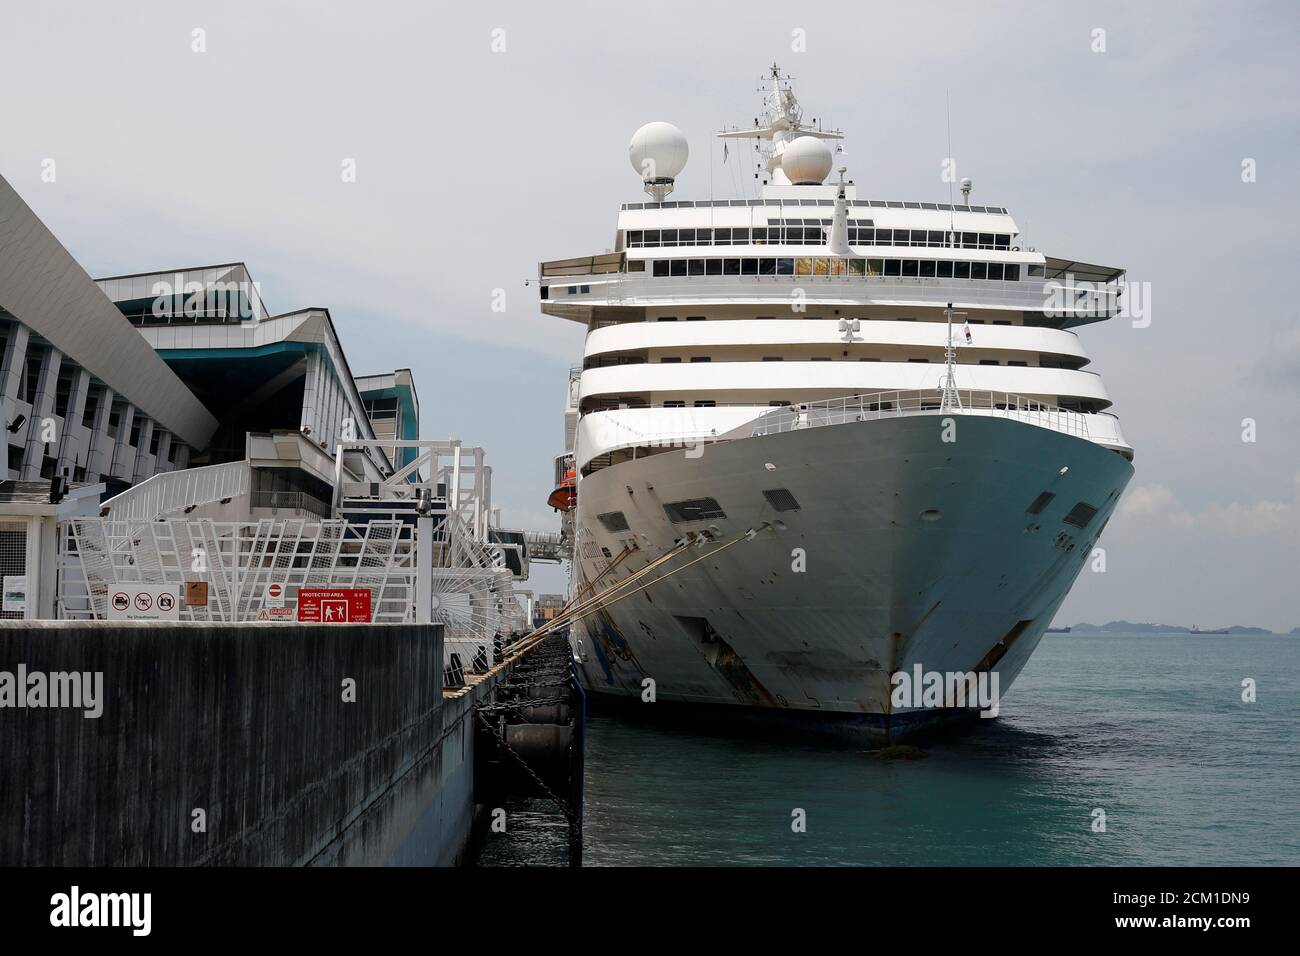 View of Star Cruise's Superstar Gemini, which is currently being accessed for use as temporary accommodation for migrant workers, berthed at Marina Bay Cruise Center, Singapore, April 17, 2020. REUTERS/Edgar Su Stock Photo